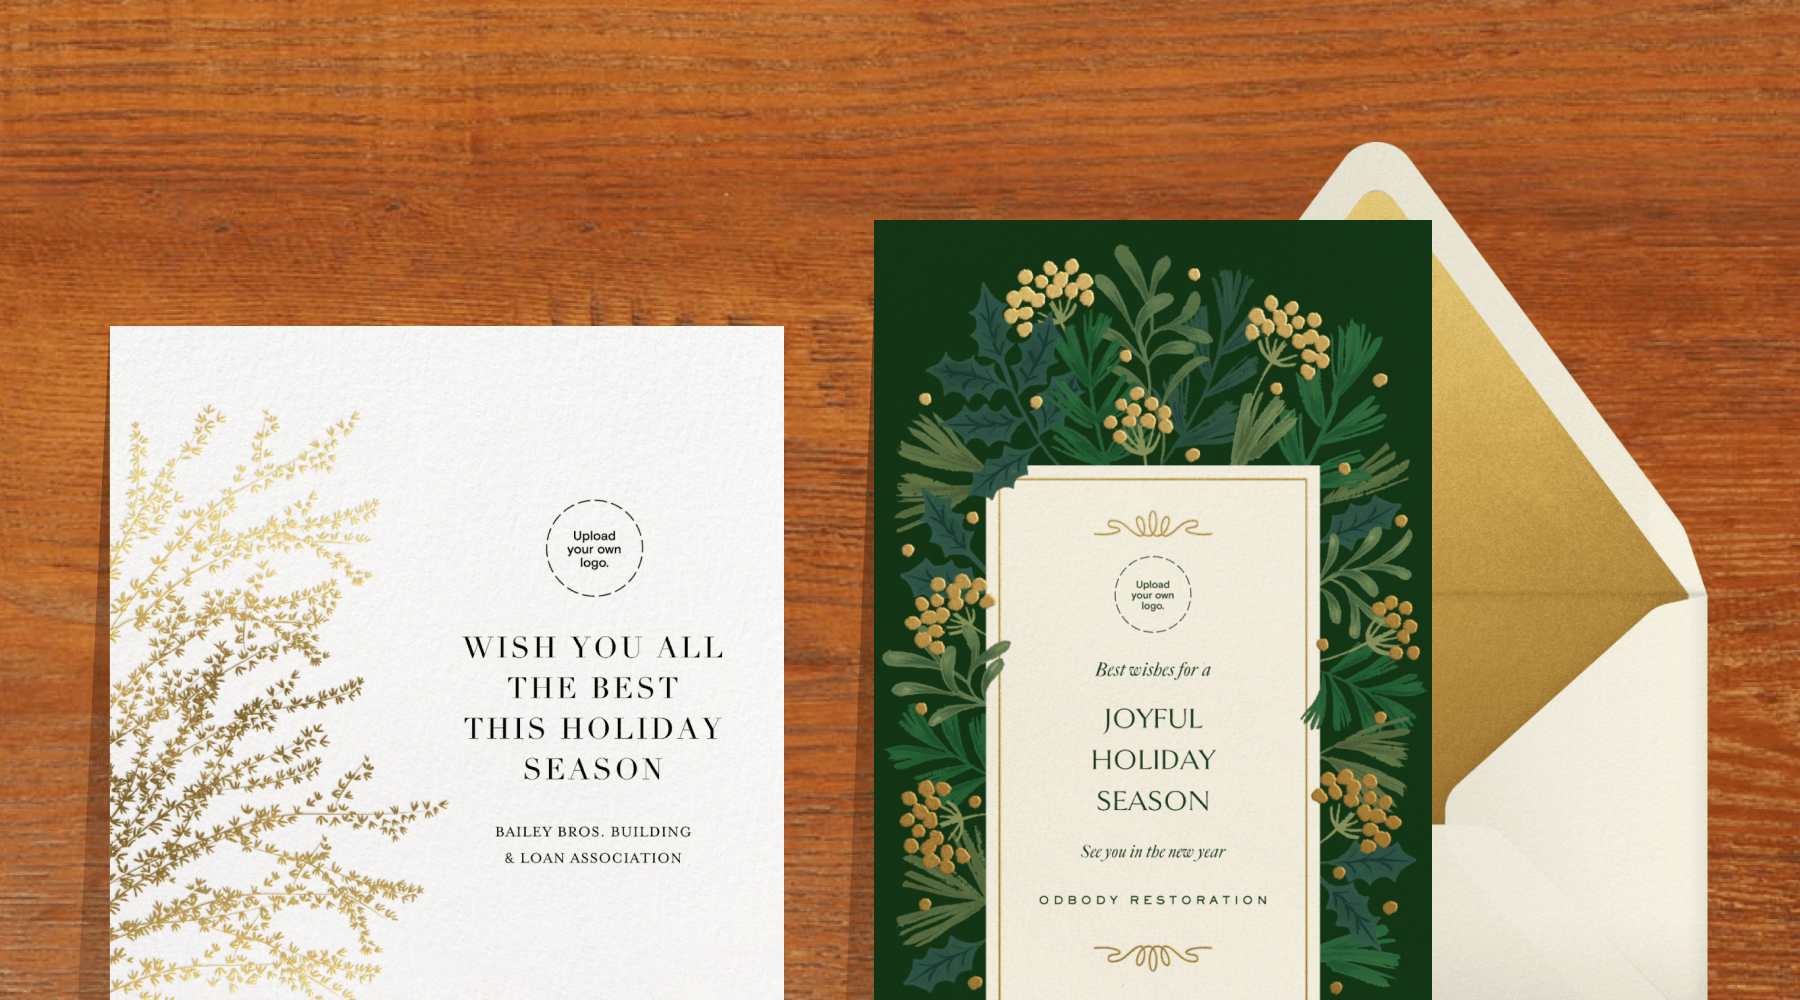 A white holiday card with gold berried branches on the side, next to a card with a dark green border with holly leaves and gold berries.